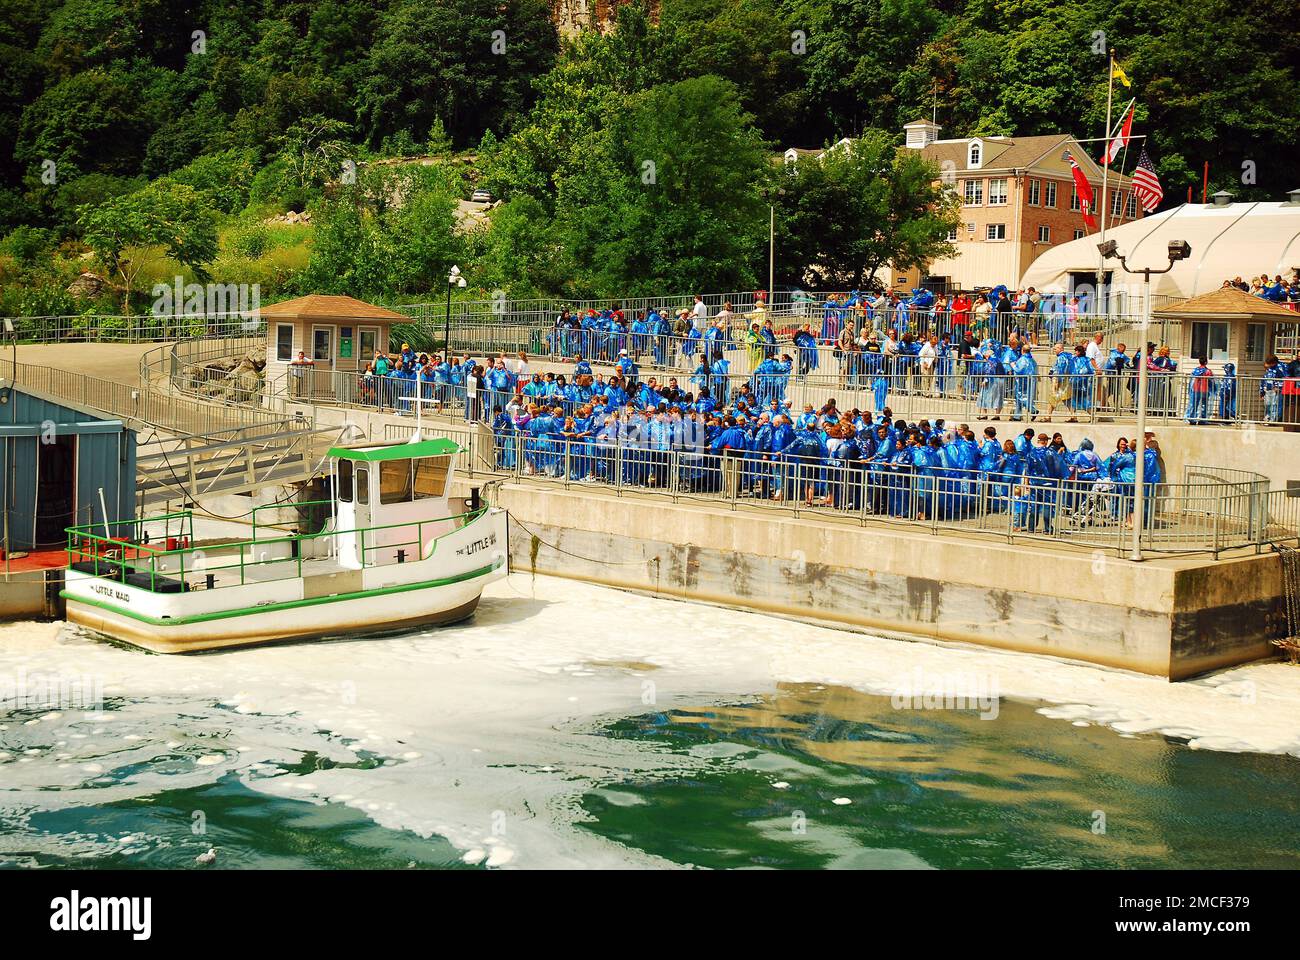 A Crowd of tourists Gathers for the Maid of the Mist tour boat ride while wearing blue ponchos in Niagara Falls, Canada Stock Photo